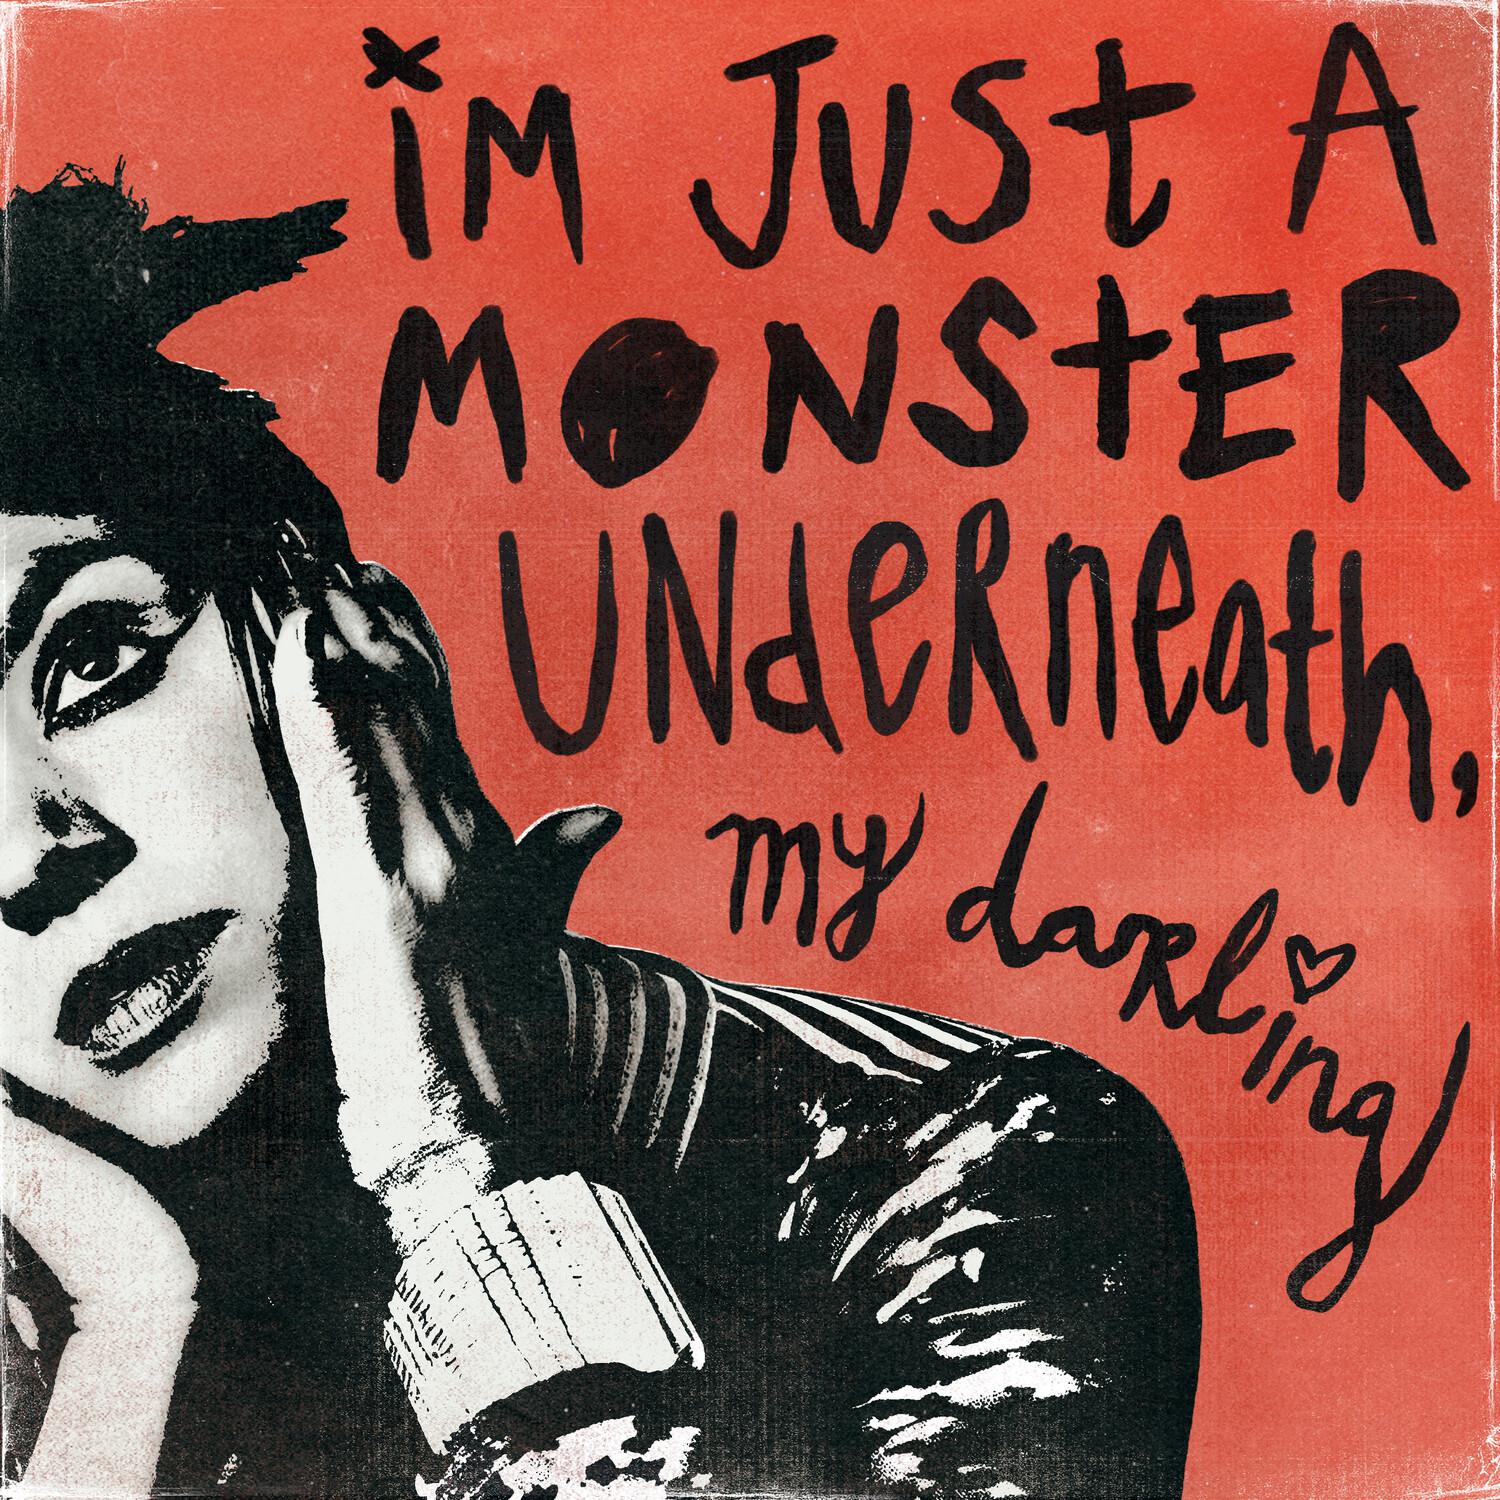 I'm Just A Monster Underneath, My Darling歌词 歌手Krewella-专辑I'm Just A Monster Underneath, My Darling-单曲《I'm Just A Monster Underneath, My Darling》LRC歌词下载